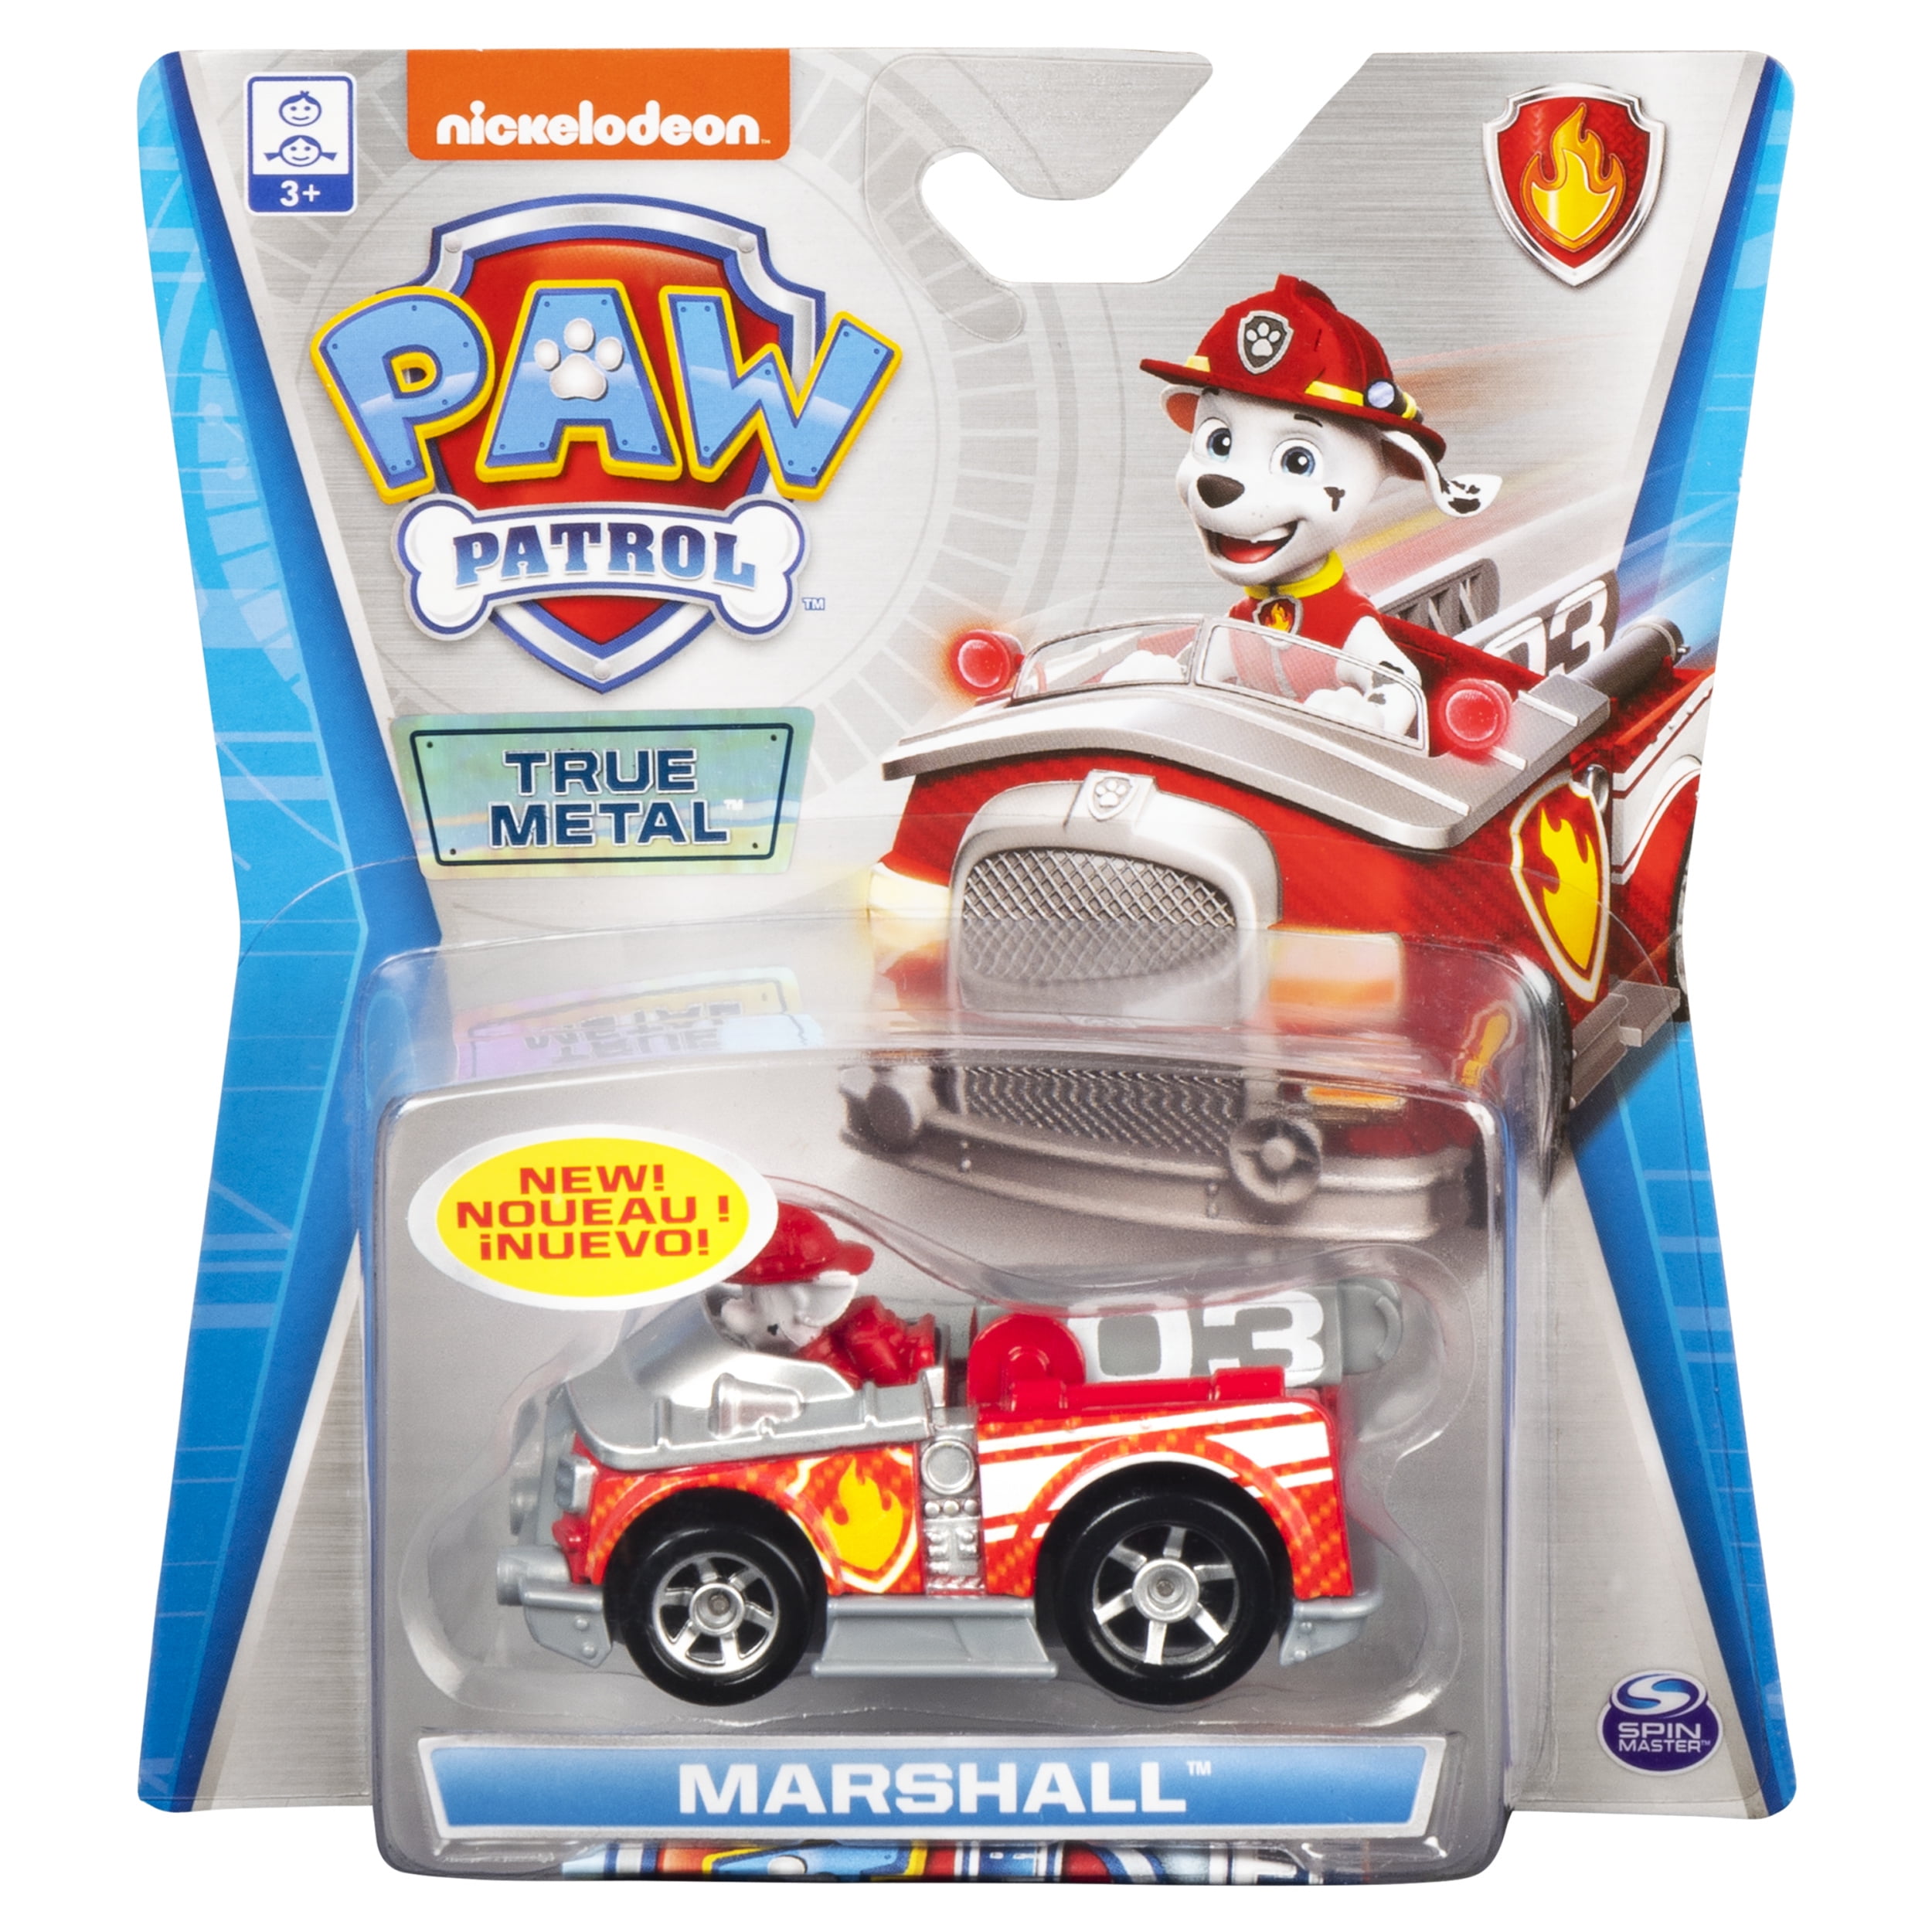 Paw Patrol True Metal Collectible Classic Series 155 Scale Marshall